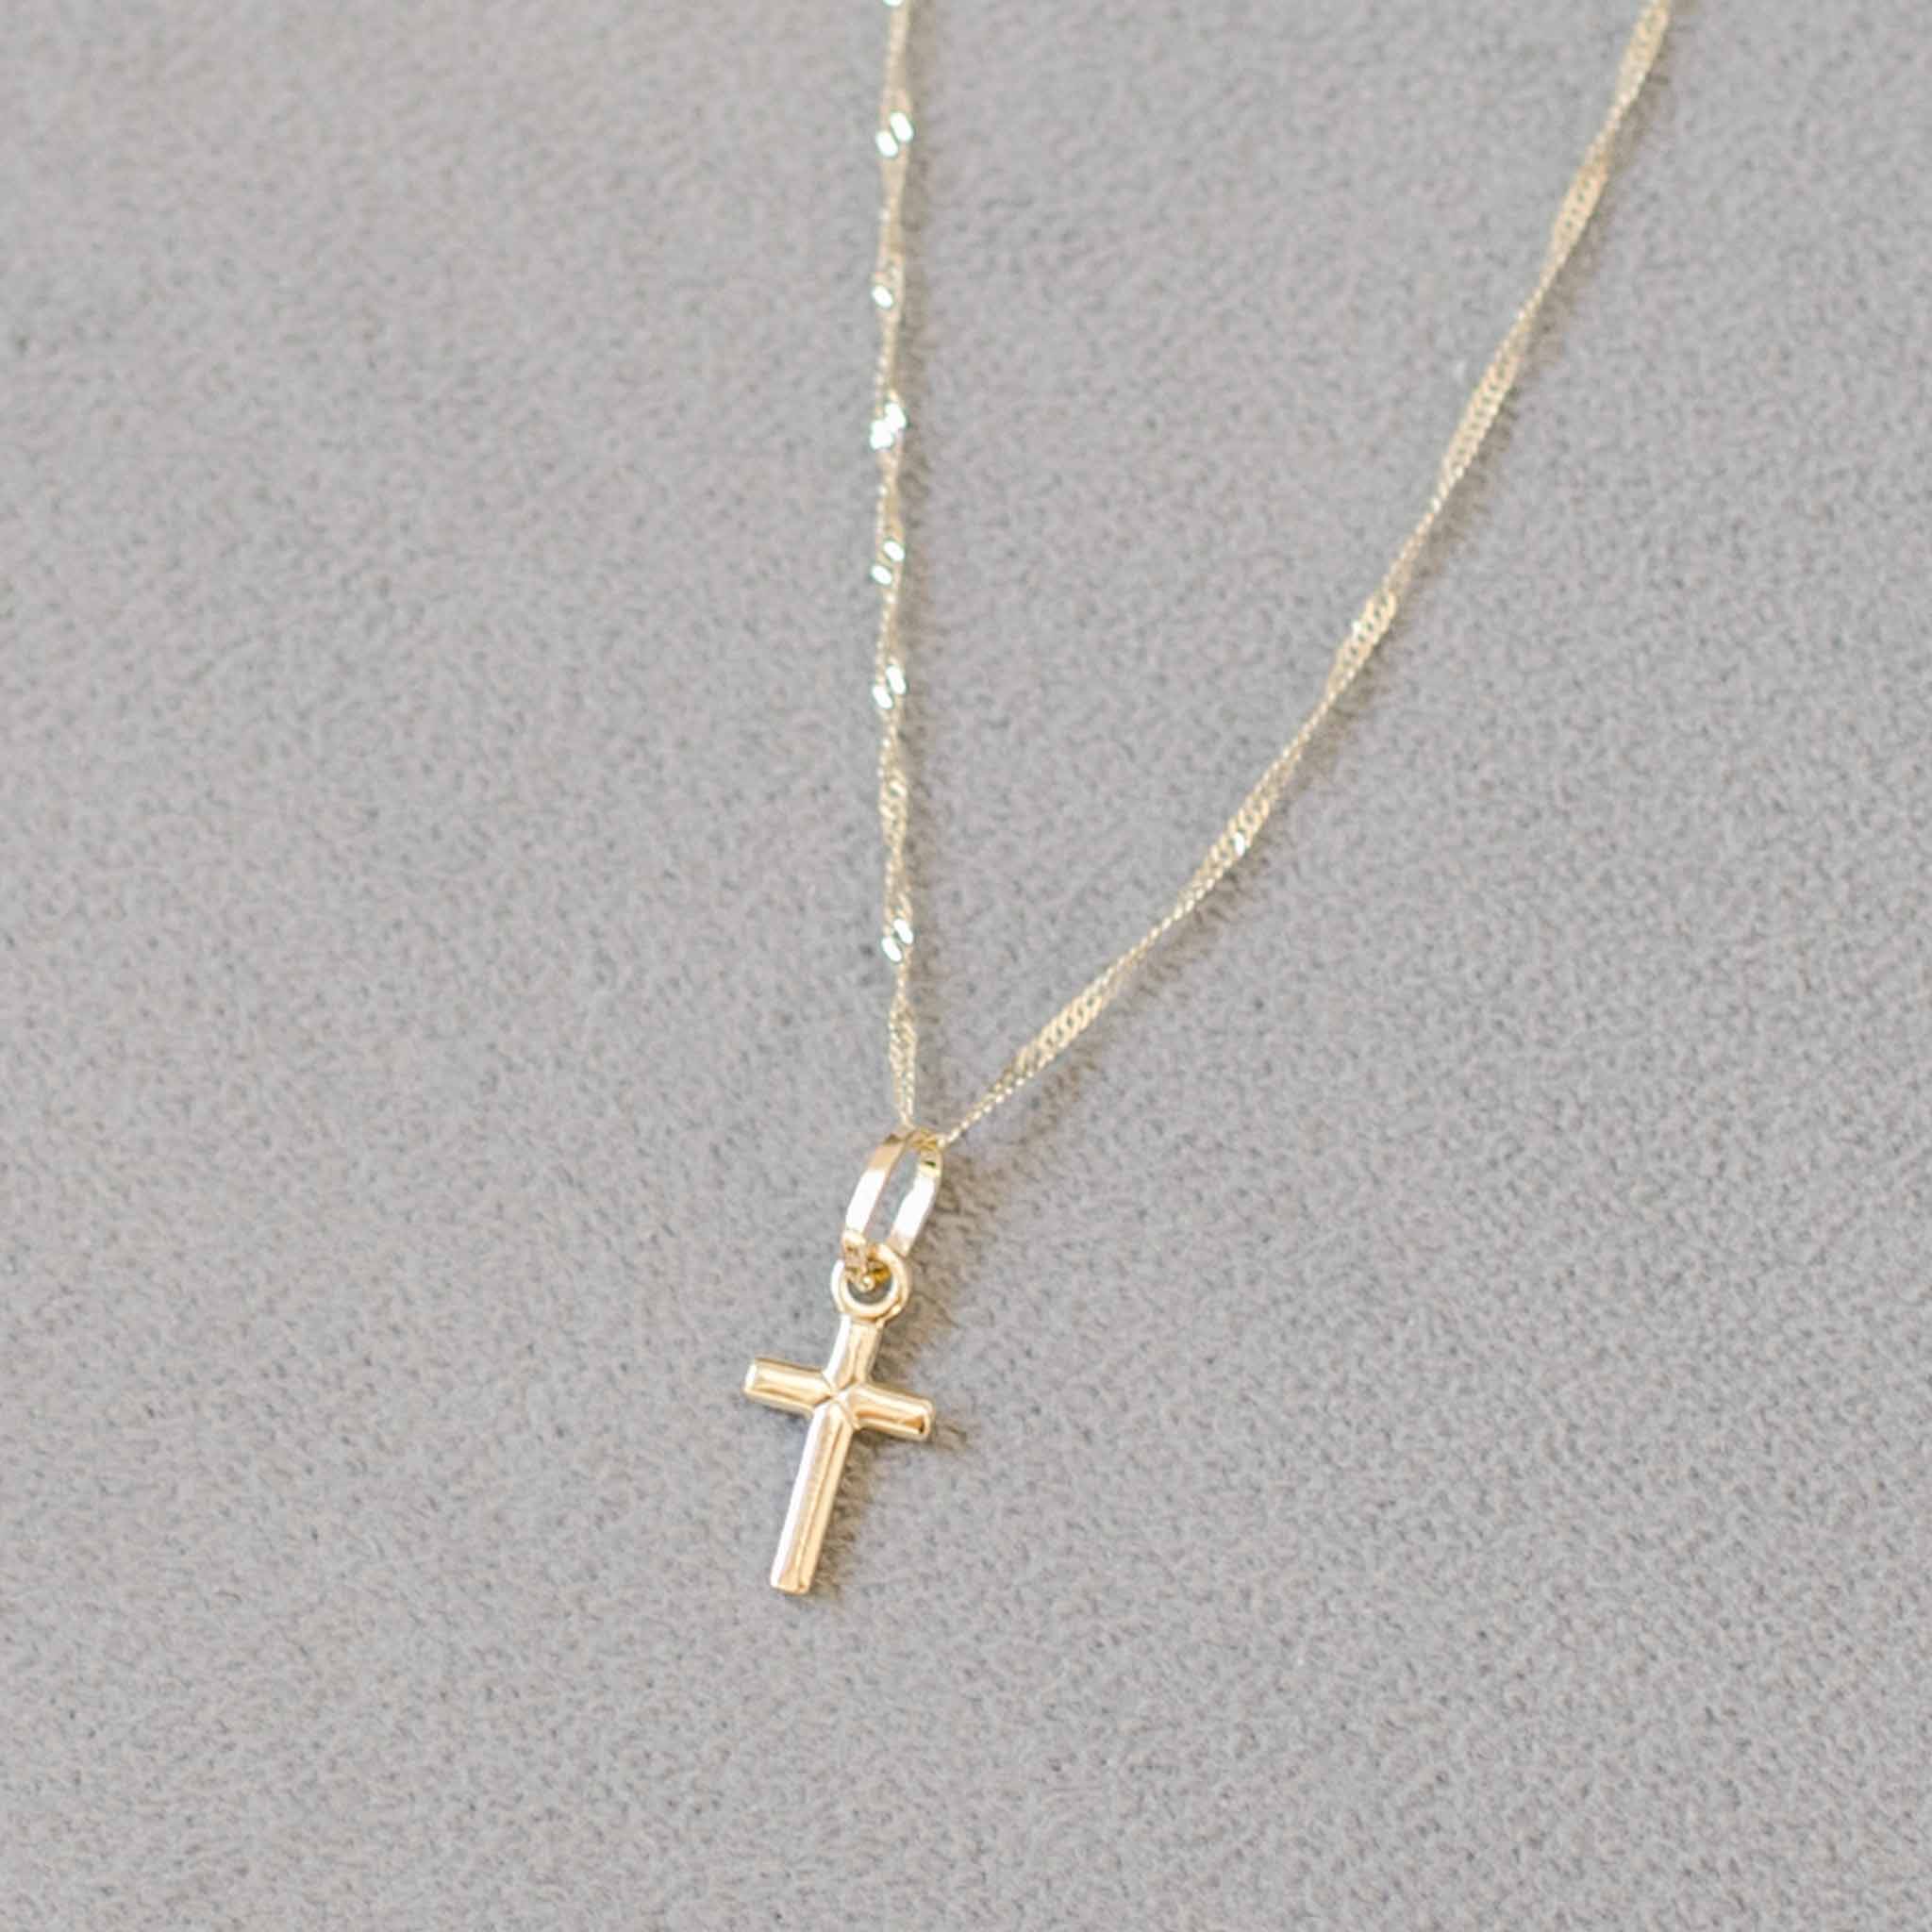 153 Jewelry by Demi & Tim - Tim's Stainless Steel Cross Pendant Necklace -  Gold